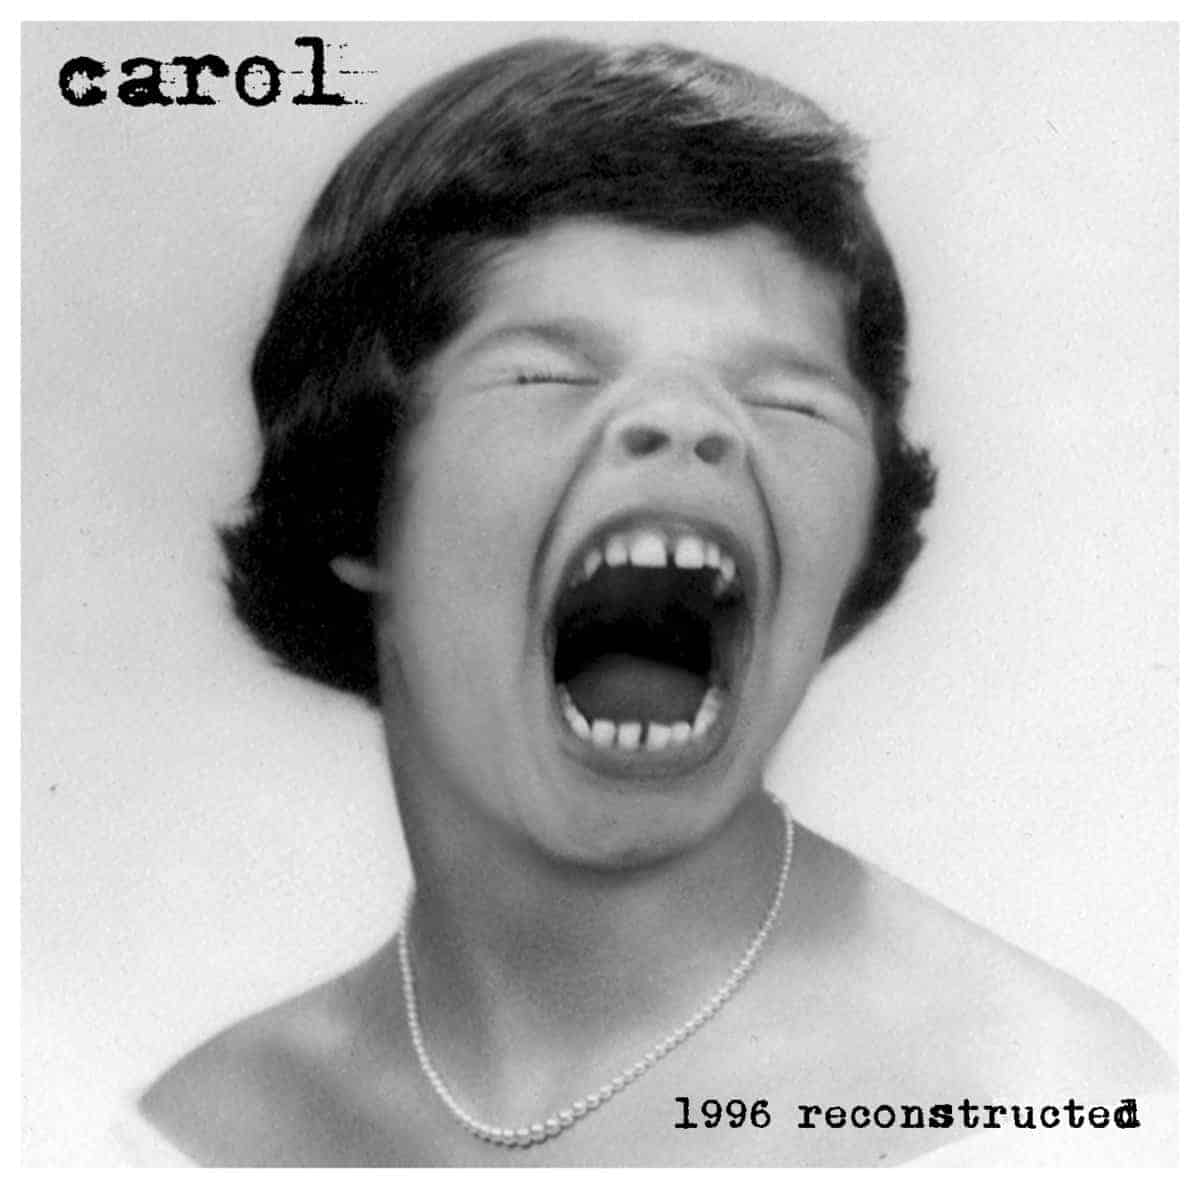 Carol - 1996 reconstructed LP (Per Koro) Next exit Bremen. Hell yeah, 22 years is a f**king long time and it’s hard to believe that the recording of these nine tracks are that old - and yet, the "1996 reconstructed" stands the test of time - it's still as fresh and vital as when it was recorded. CAROL was permanently disbanded in 1997 after their brief existence and was another legendary band of the almighty mid-90s Bremen scene, with members involved in bands such as SYSTRAL and MÖRSER. It's very difficult to find the words to describe their music - they obviously take all kinds of elements from hardcore and metal just to create the most perfect mutation of all of them in the form of songs that come alive as new and unique entities. Their blend of discordance and precise, barrelling riffs, laid out within the framework of frantic bursts of violence and chronic brutality, combined with the most ear-splitting vocals around is what CAROL was all about. What really sets CAROL apart was their absolute, unrelenting passion for the chaotic brand of hardcore they played. "1996 reconstructed" is what you've been waiting for: a collection of nine lost songs (two previously released tracks from the "cry now, cry later vol.4" compilation and their split 7" with STACK) and seven new tracks from the same recording session in 1996. Everything has been remastered for pristine sound quality, while maintaining the raw, frenetic feel the band had always given off. Listening to this album repeatedly just might kill you, but at least you will die with a smile on your face. Do not pass on these lost songs - fury, emotion, intensity, it's all here in spades. CAROL has helped to shape a style that has been imitated over decades by countless bands but remains unequalled. There’s no better time to (re)acquaint yourself with a band that’s gone, but certainly not forgotten. REGULAR BLACK vinyl (limited are sold-out) comes with an inlay, a small poster and includes a digital download card with the three additional tracks from the 7".